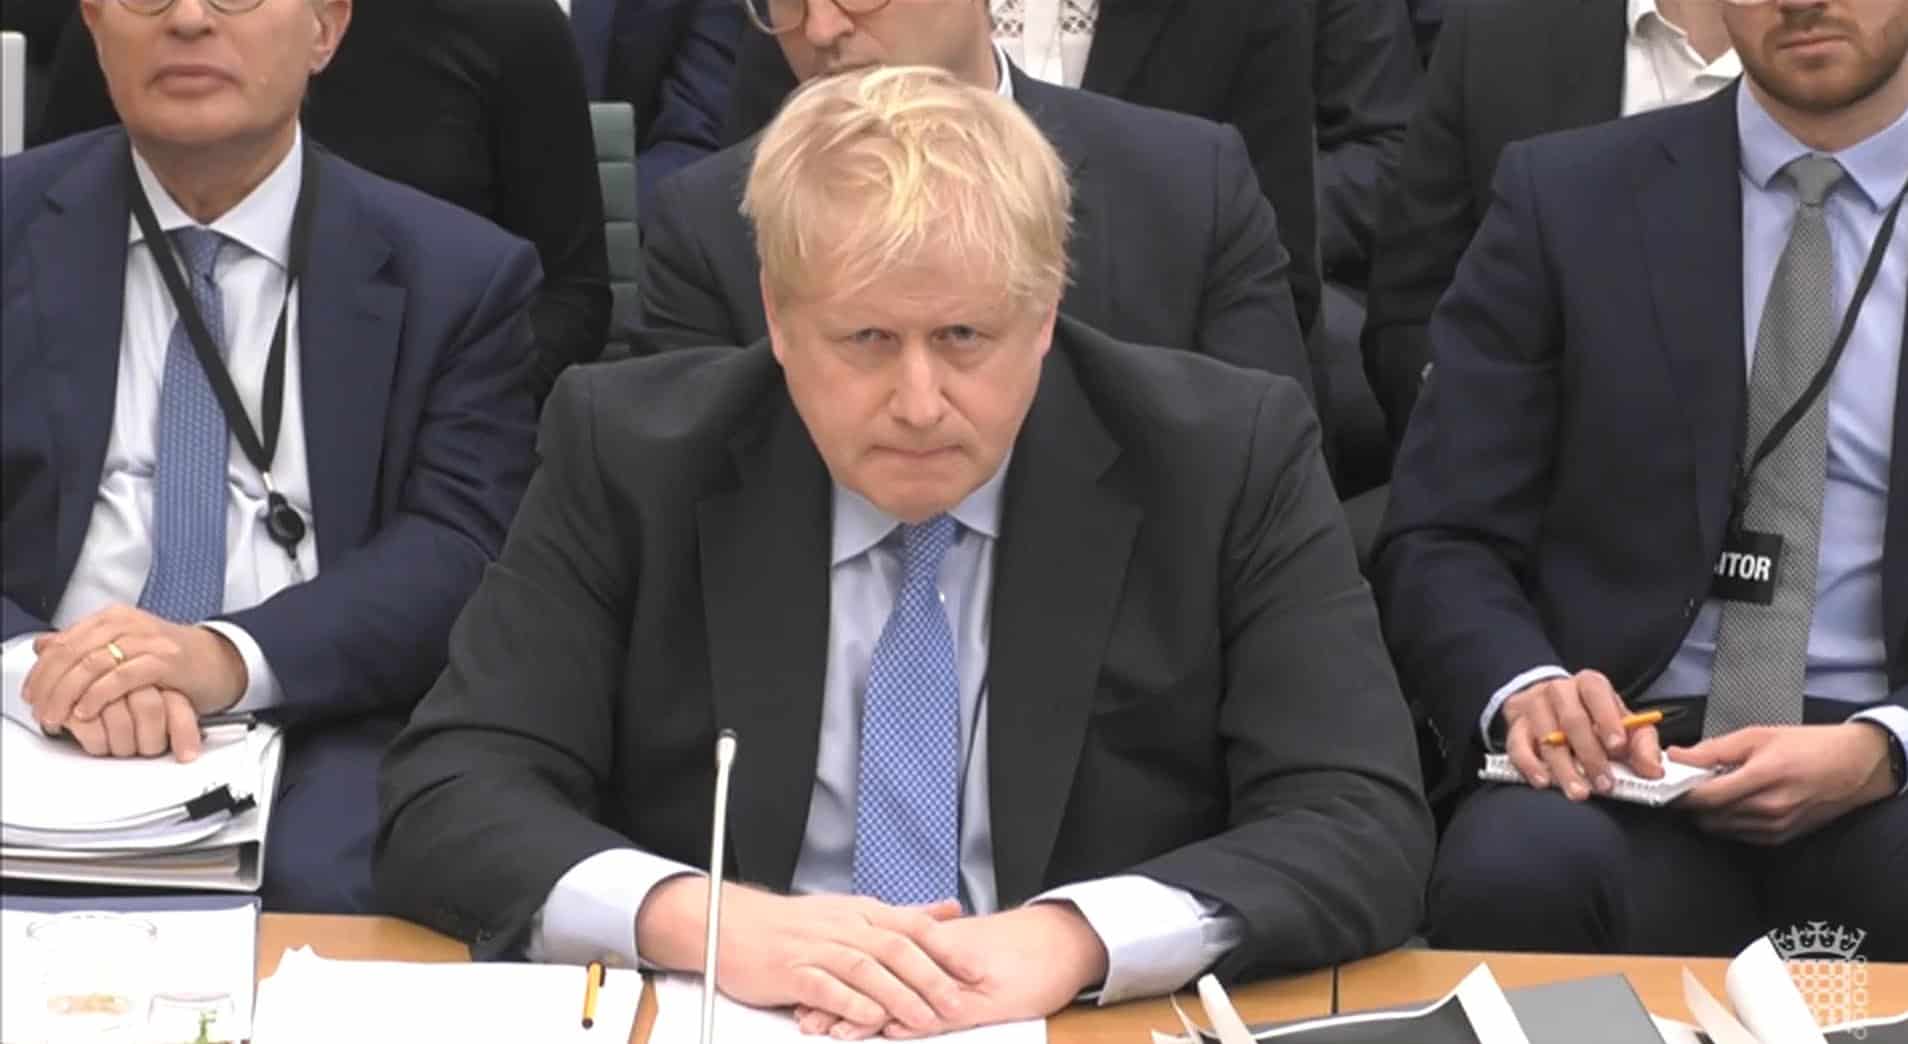 Johnson schooled as he says ‘No 10 staff wouldn’t swap pens’